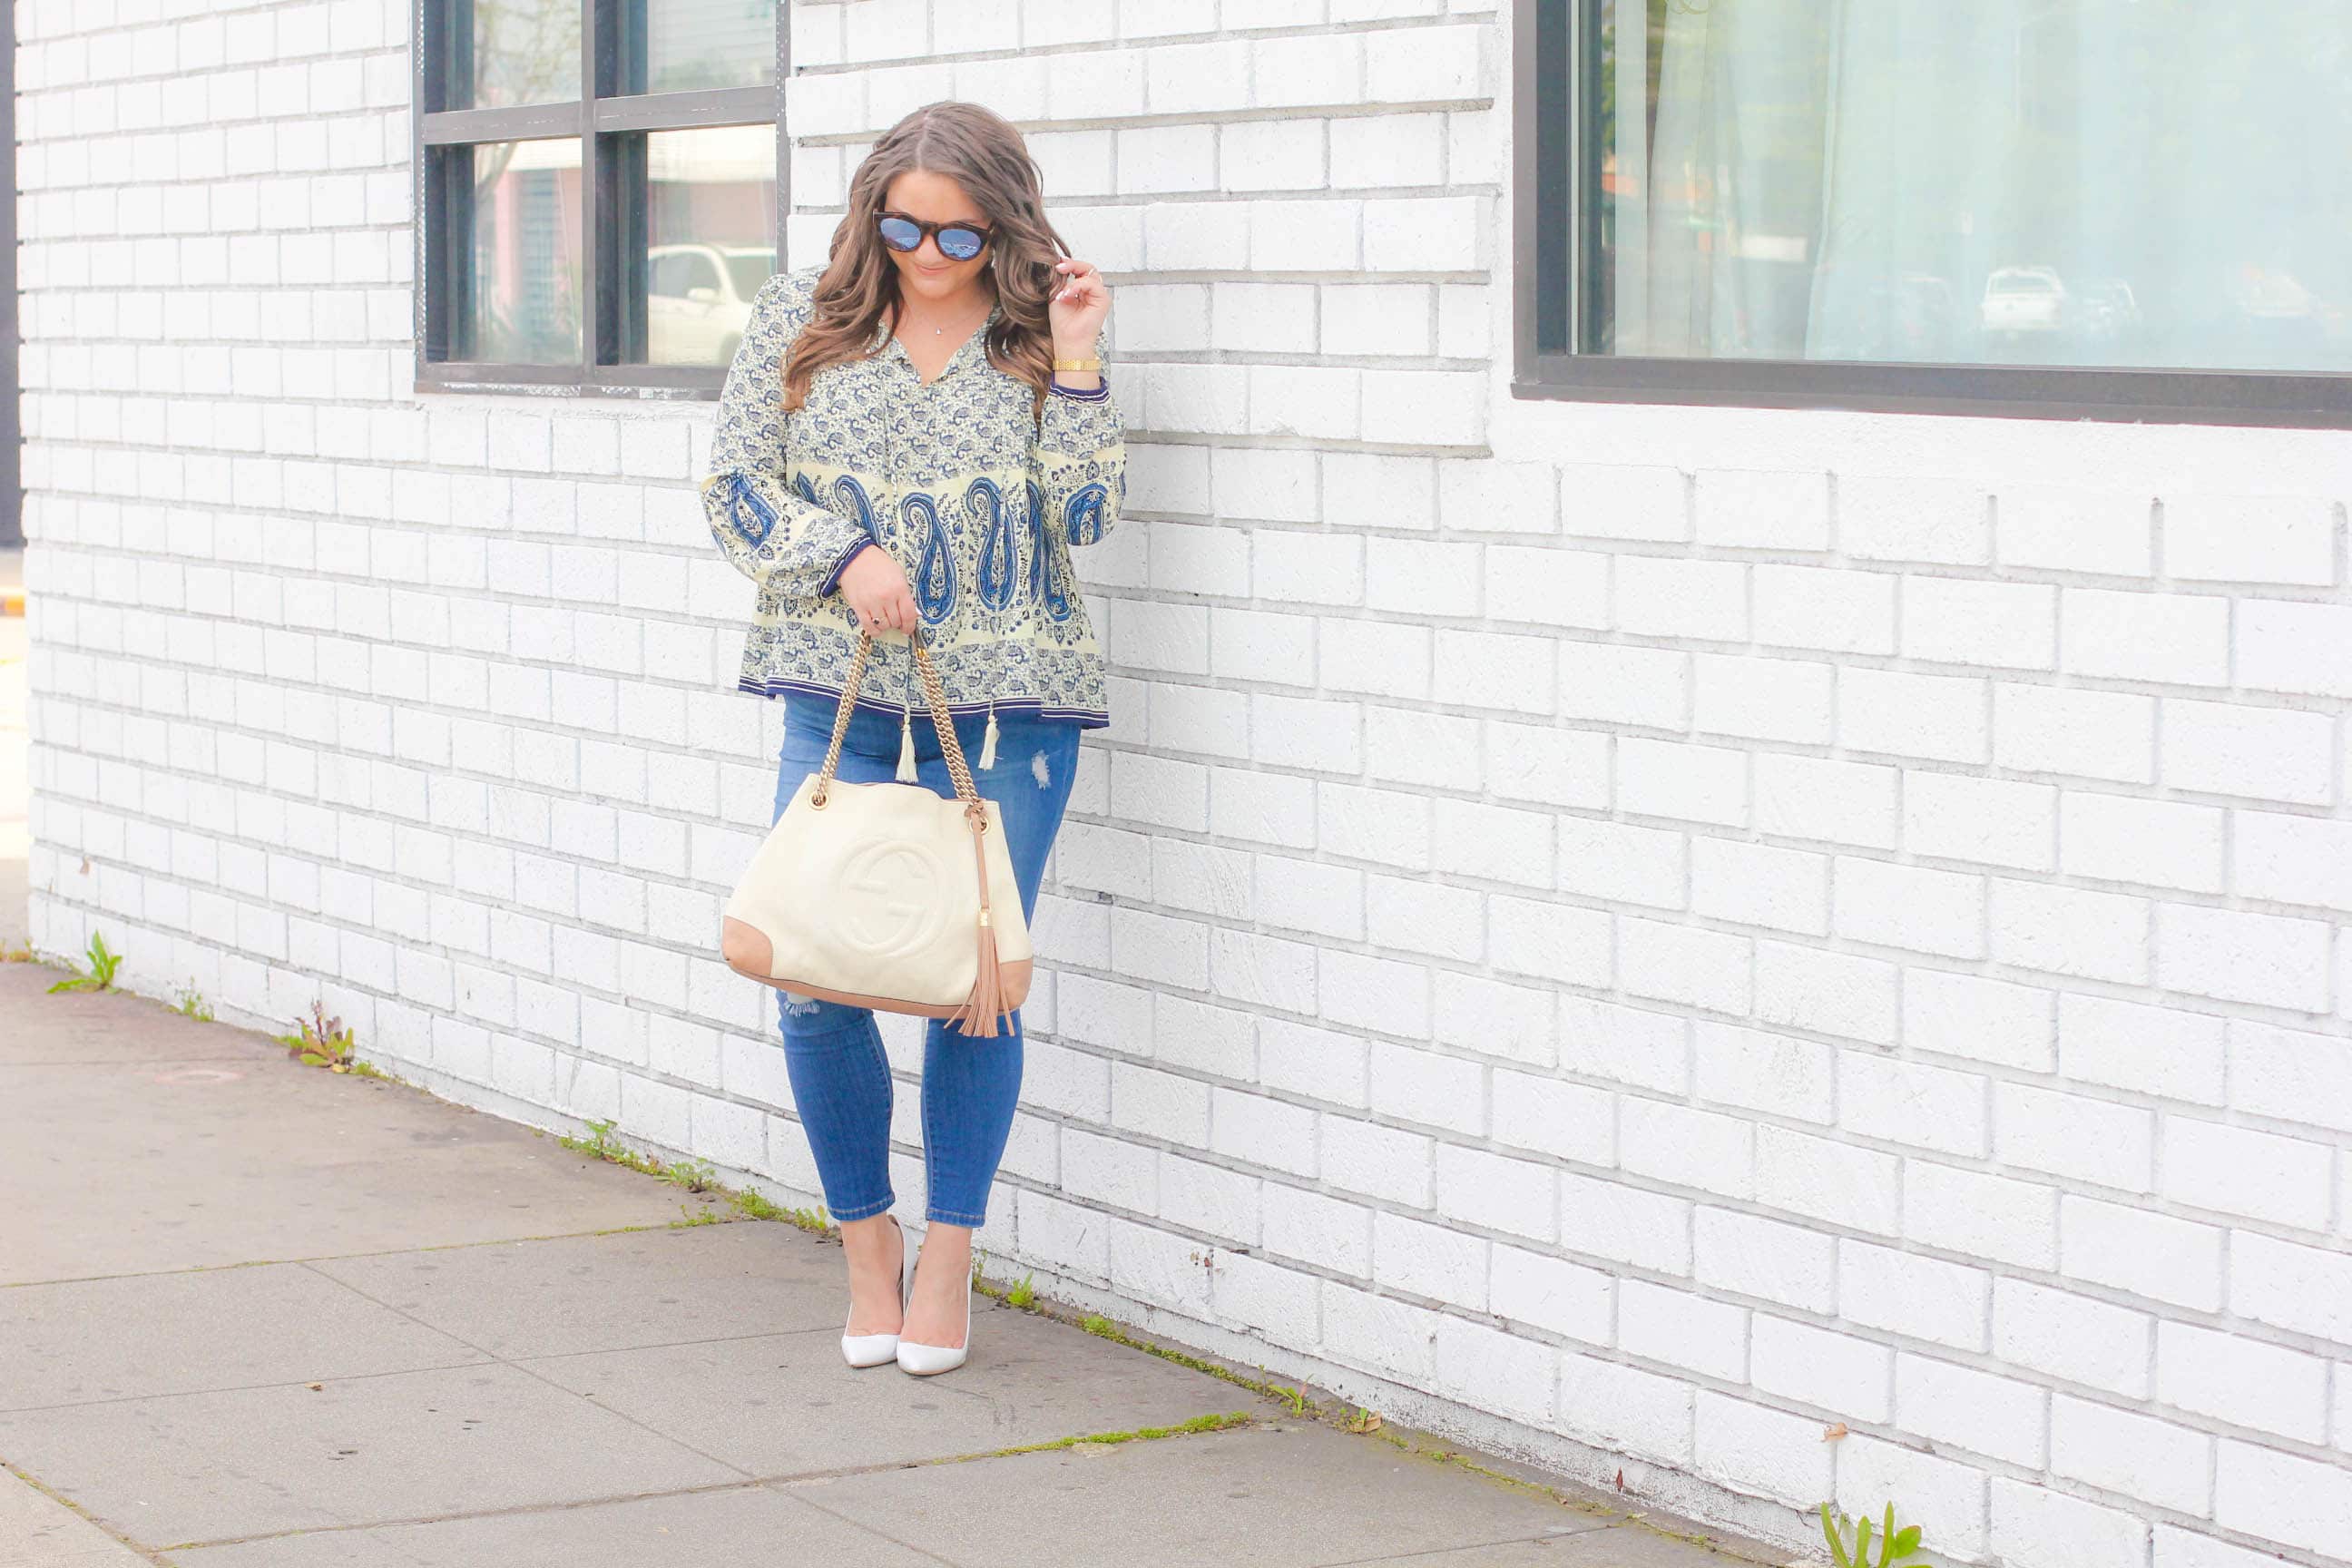 missyonmadison, melissa tierney, missyonmadison instagram, melissa tierney instagram, wild blue denim, white pumps, white pointed toe pumps, gucci, gucci soho tote, white gucci soho tote, bloglovin, fashion blogger,style blogger, spring style, spring trends 2017, spring style 2017, jeggings, wild blue jeggings, ripped jeans, reipped jeggings, fashion trends, le specs sunglasses, le specs, wild blue denim boho top, paisley print top, boho top, how to style skinny jeans, how to style white pumps, how to style distressed jeans, la blogger, affordable fashion,